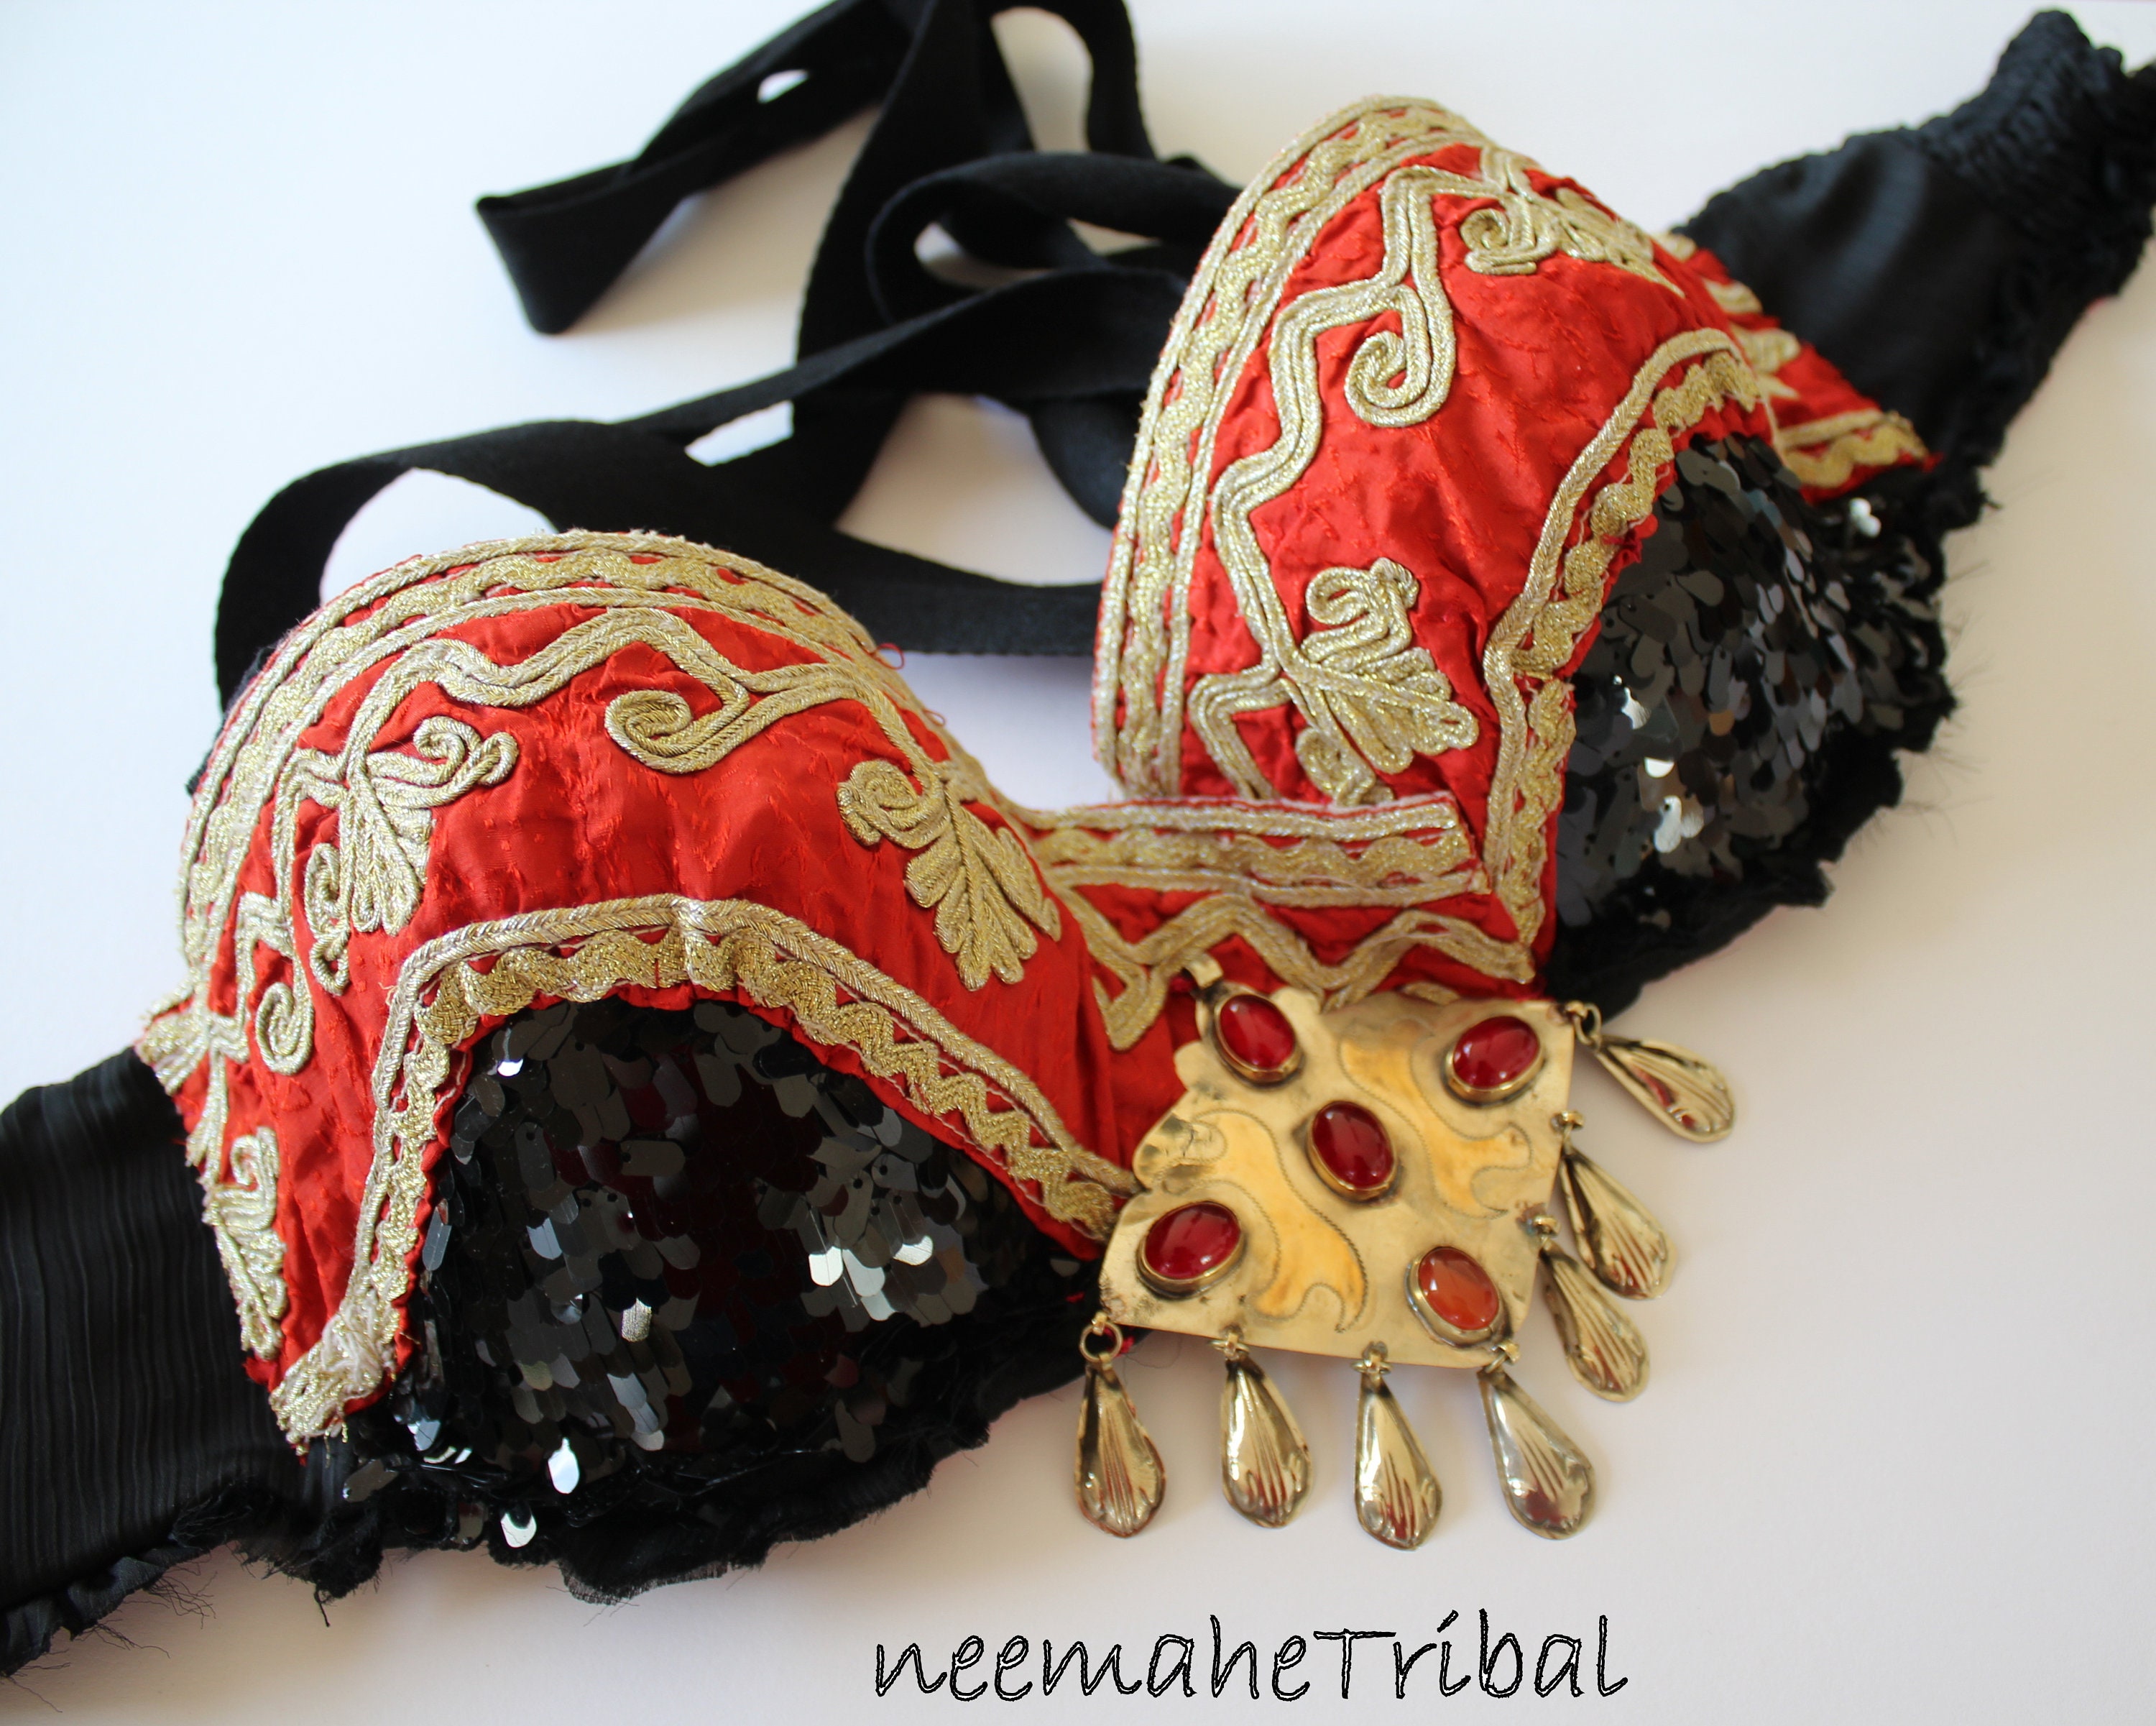 Western Fashion 2982-RED Tribal Bra with Pendent, Black & Red - One Size